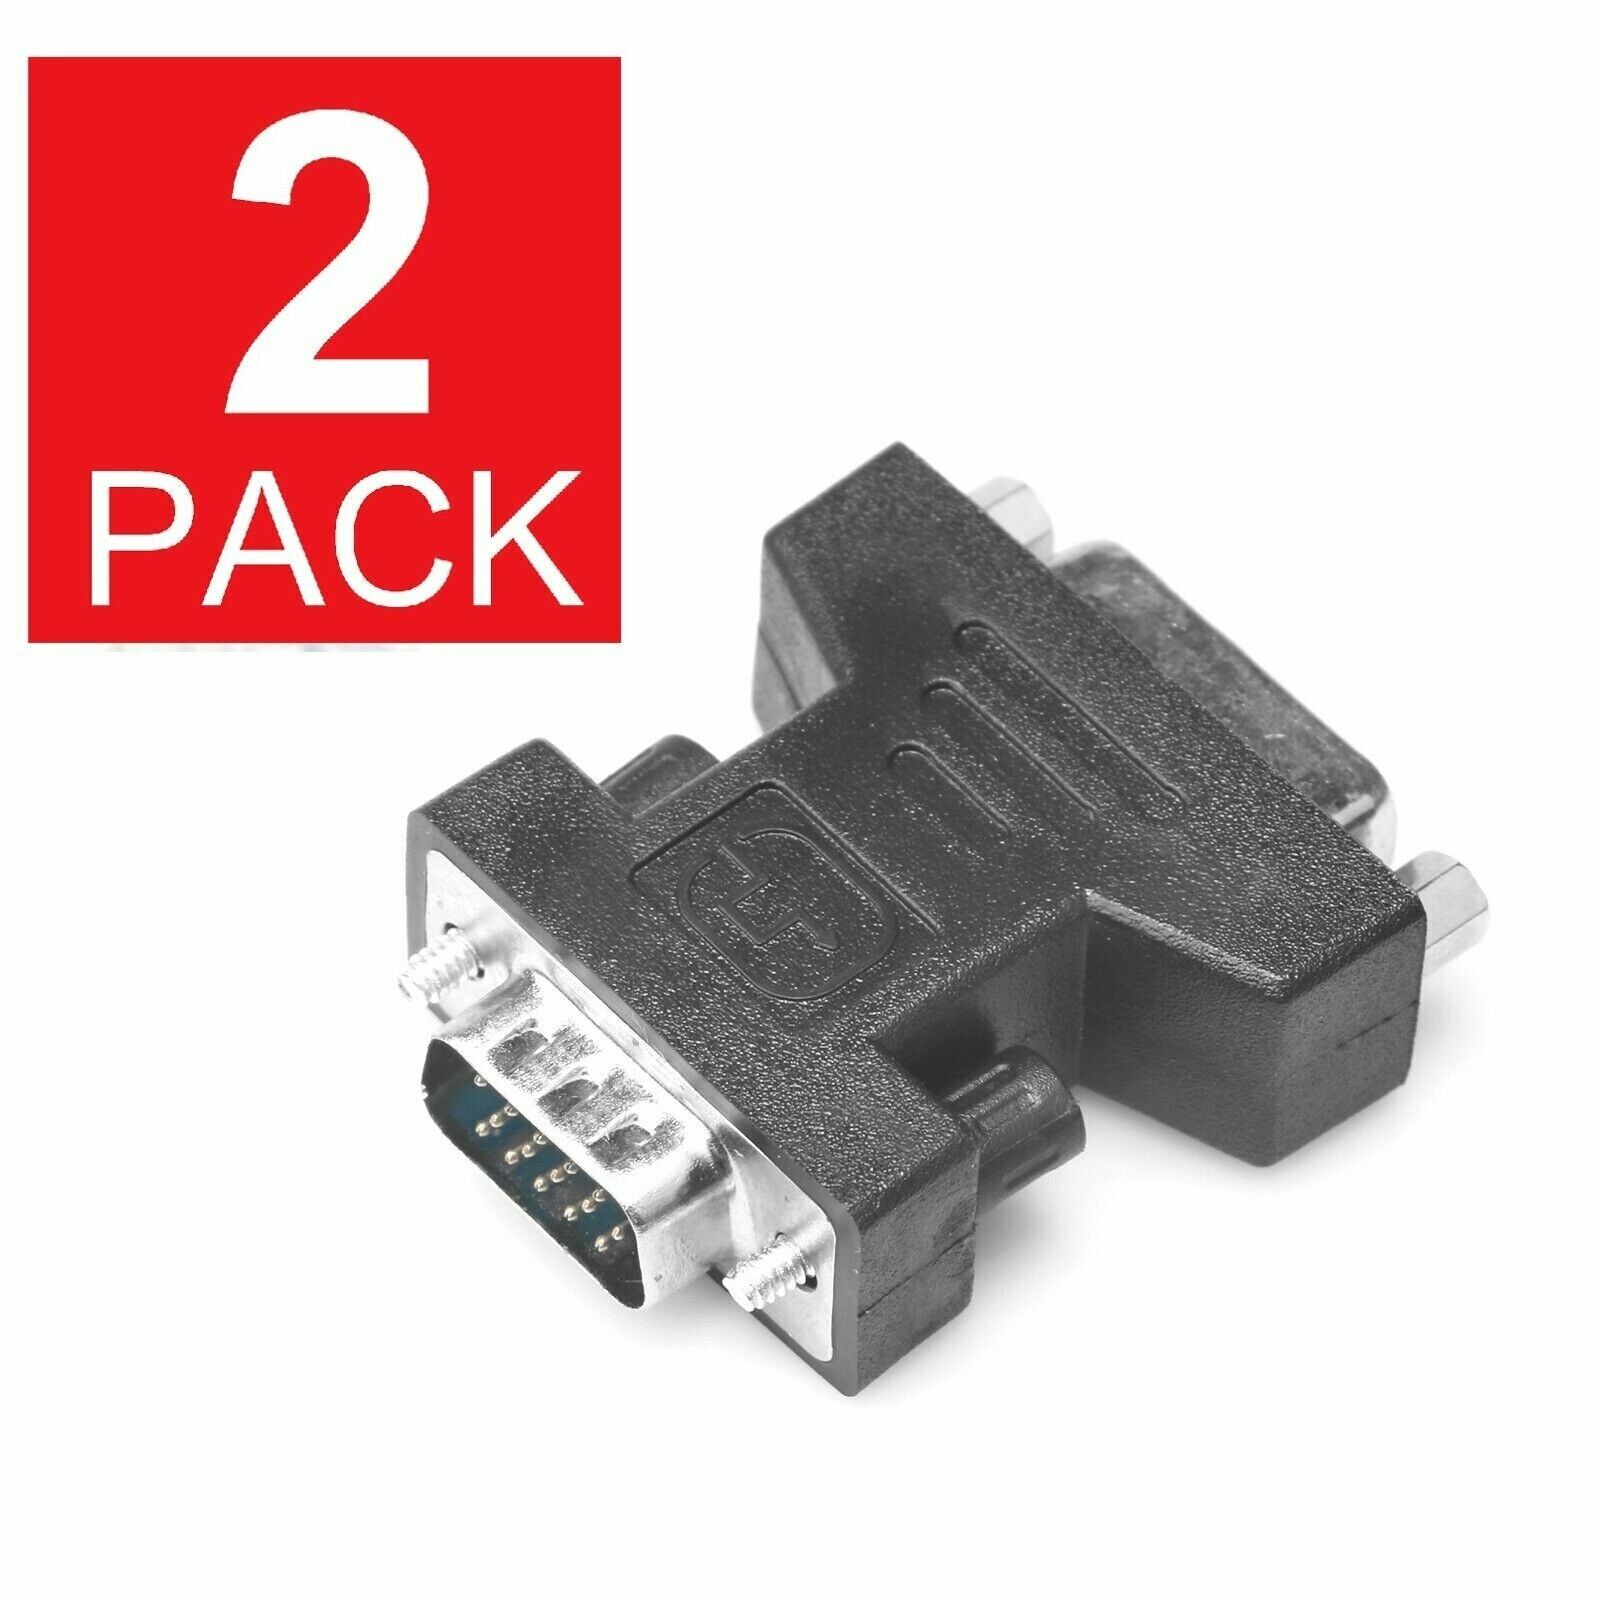 2-Pack DVI-I Female Analog(24+5) to VGA Male(15-pin) Connector Adapter dual link